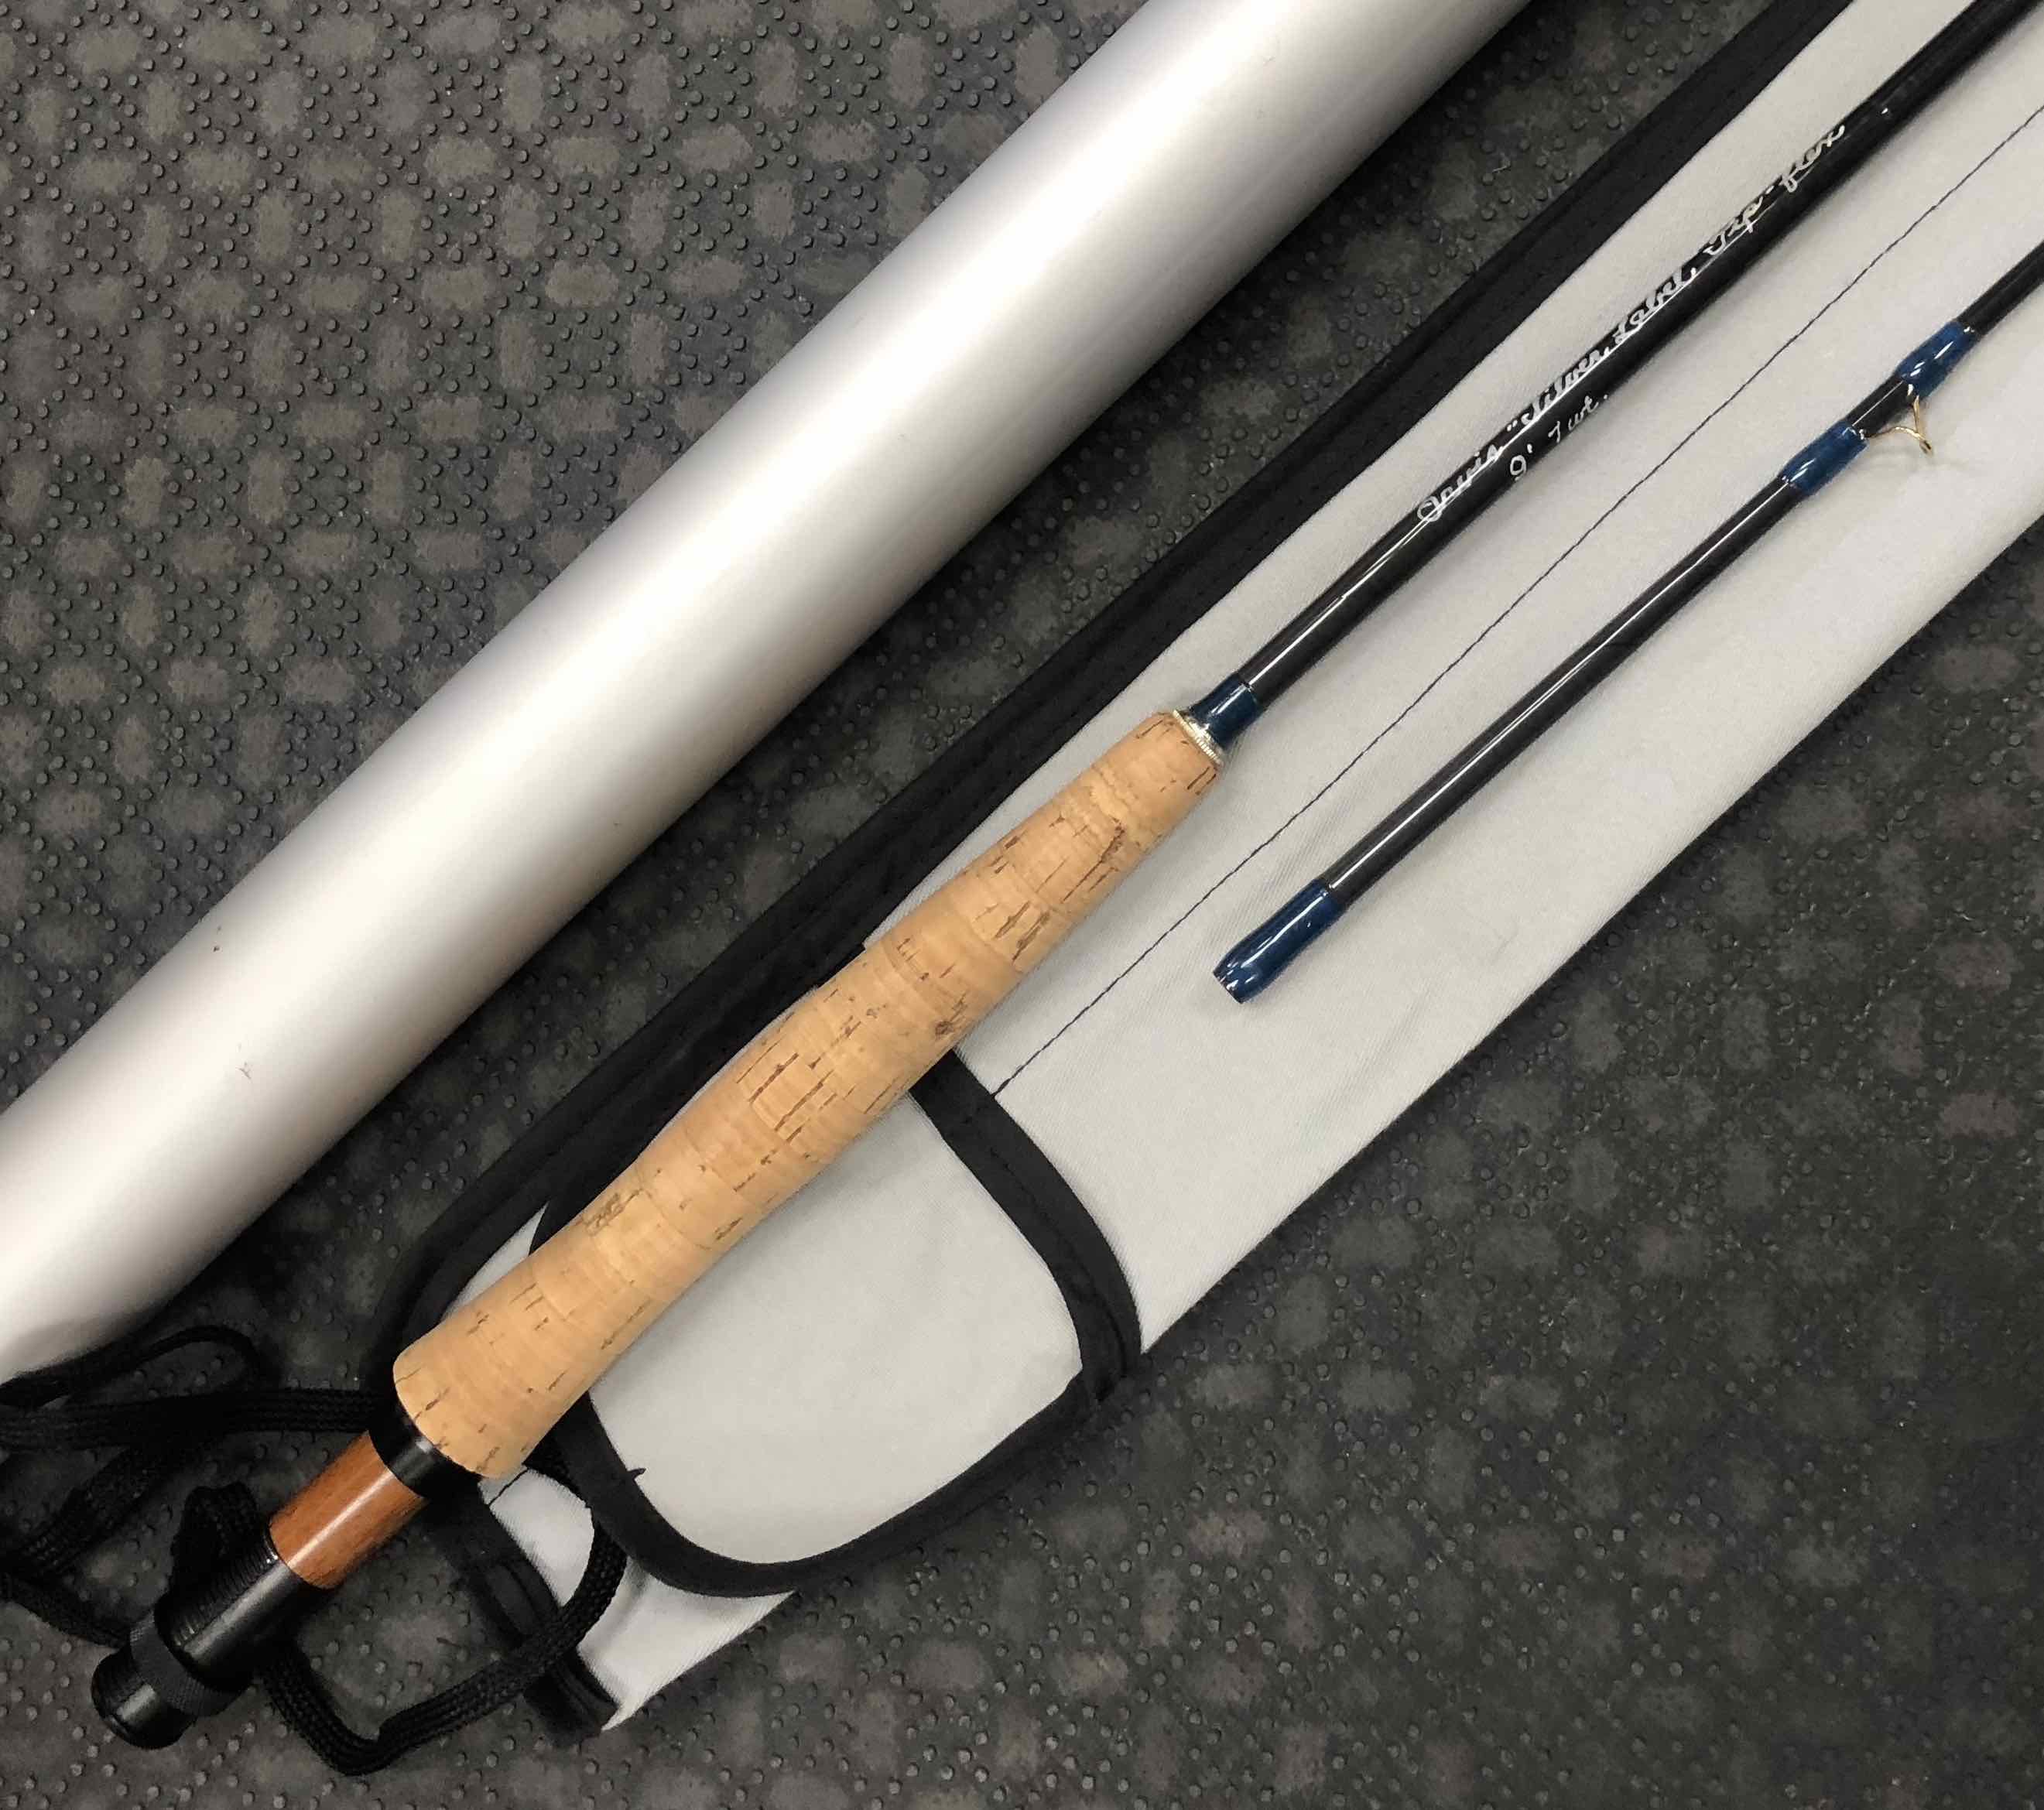 SOLD! – REDUCED! – Orvis “Silver Label” Tip Flex Graphite 2pc Fly Rod – 9′  7wt c/w Sock & Aluminum Tube – EXCELLENT CONDITION! – $115 – The First Cast  – Hook, Line and Sinker's Fly Fishing Shop